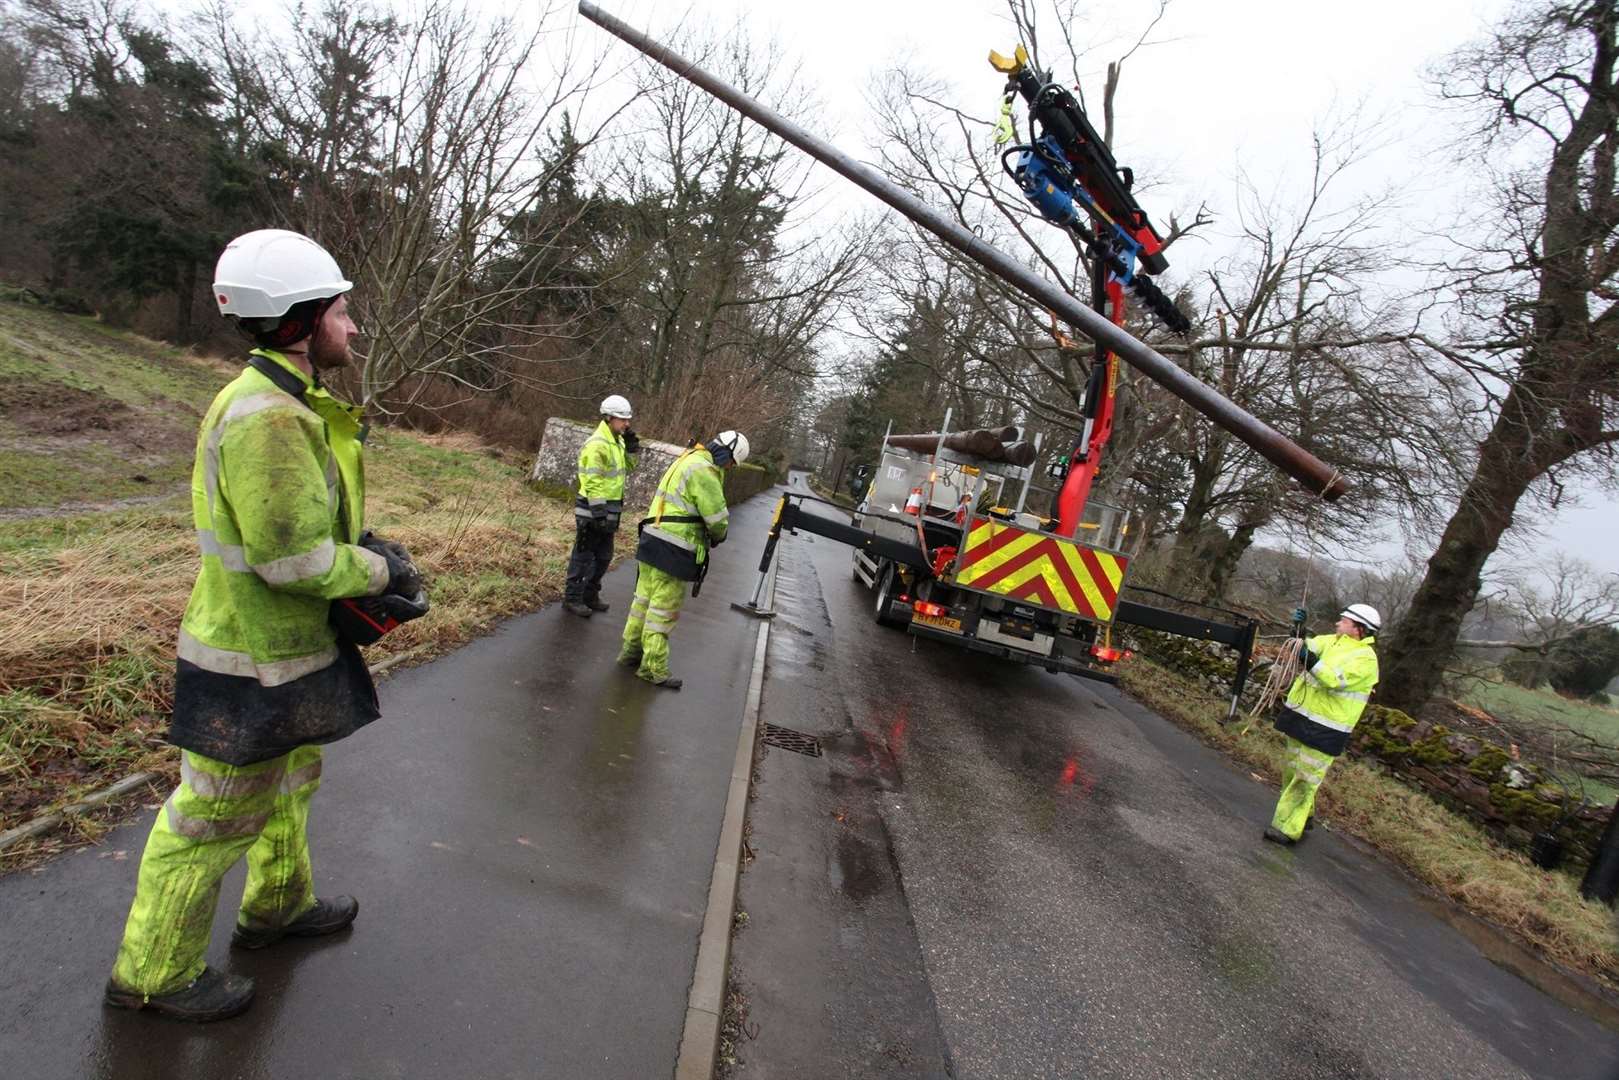 Engineers worked around the clock in atrocious weather conditions to repair storm damage in north-east Scotland.